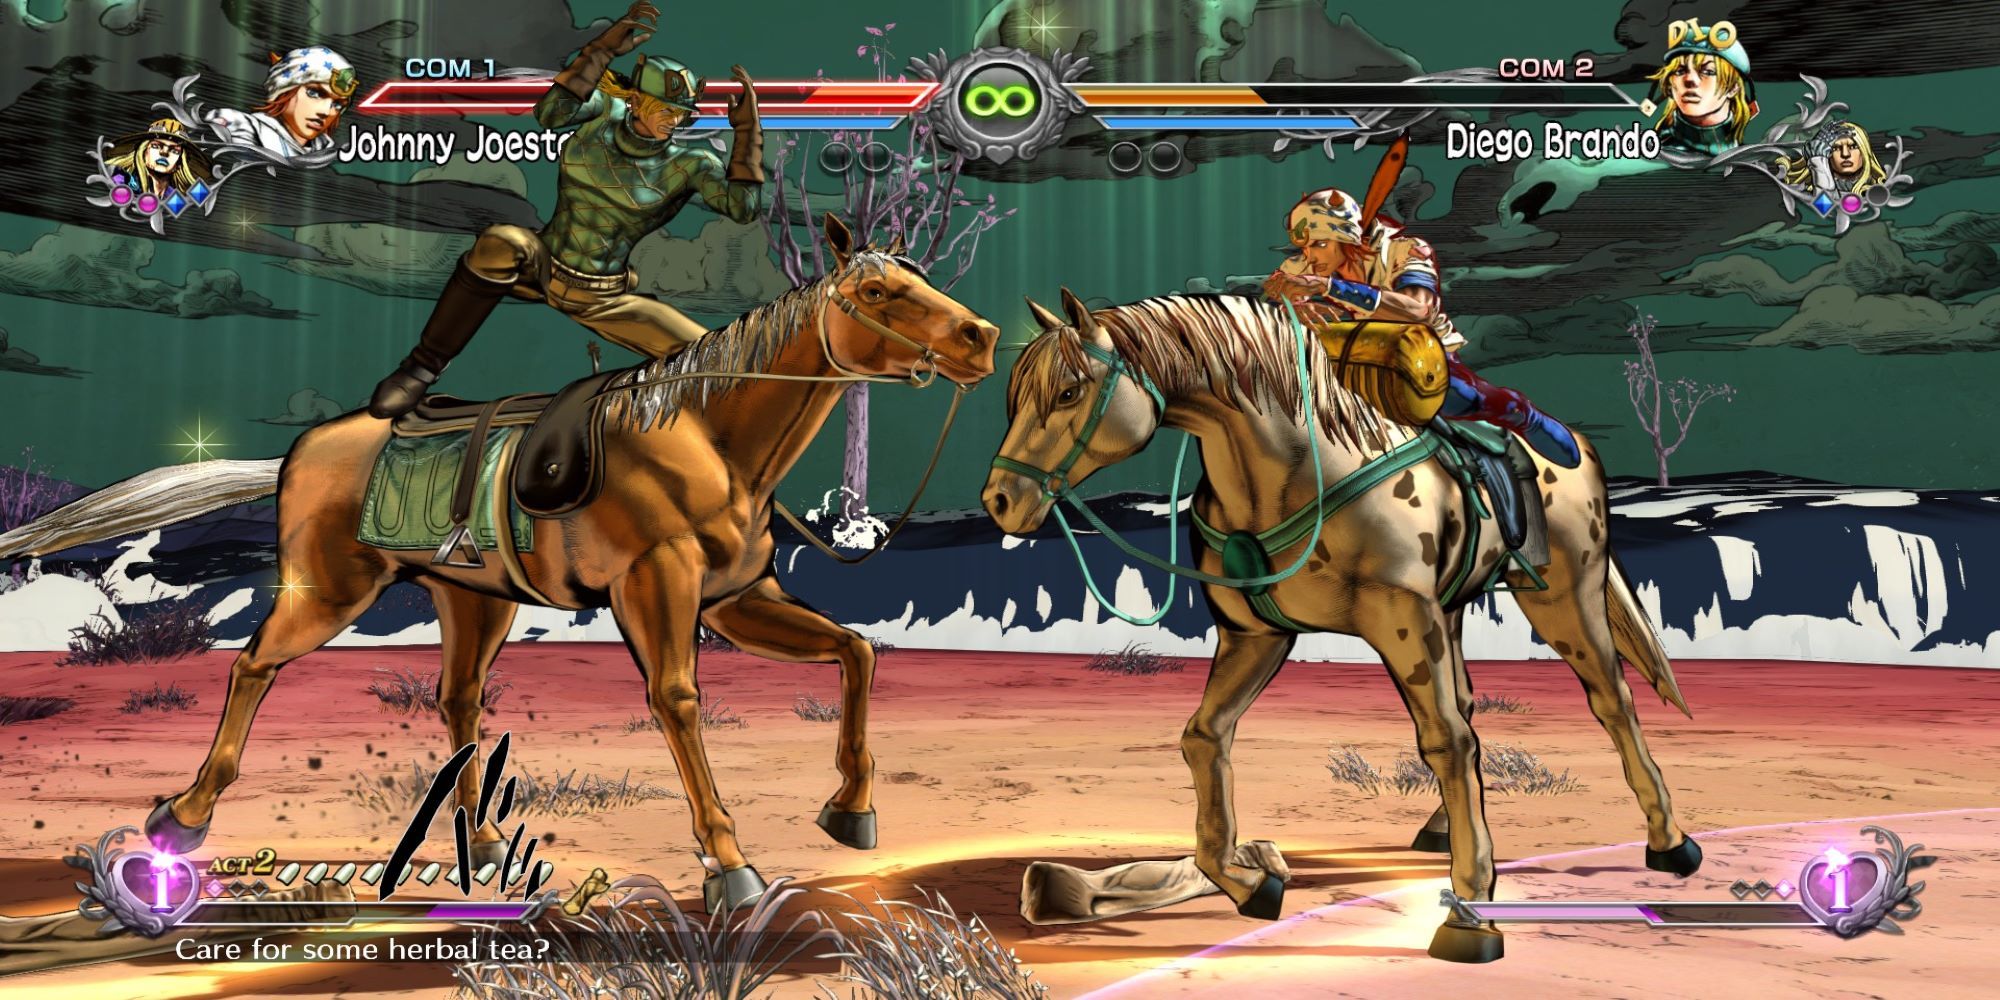 Diego and Johnny have a stand off on their horses during a battle at the Philadelphia Seaside in JoJo's Bizarre Adventure ASBR.